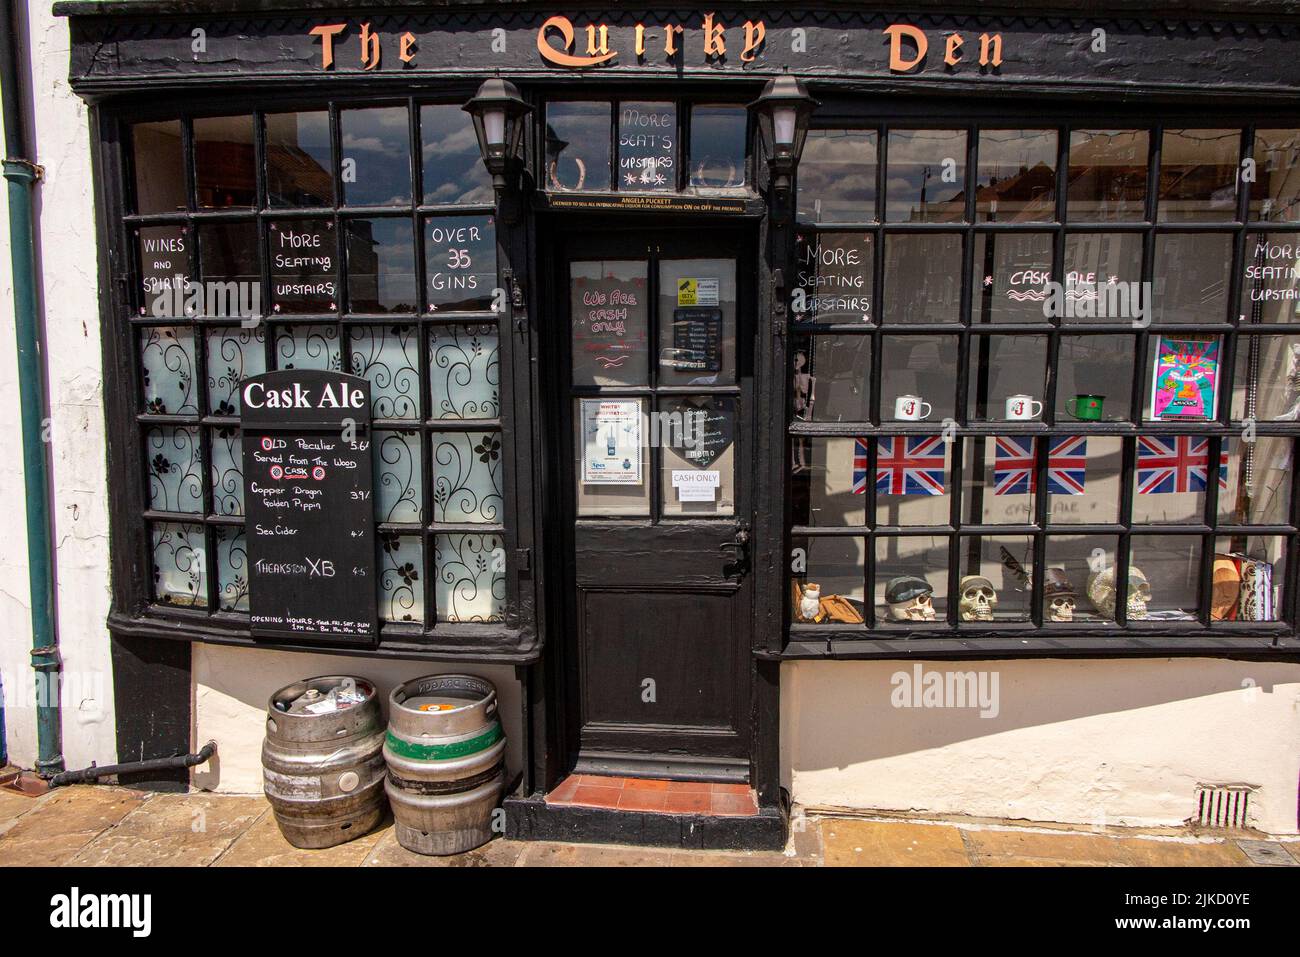 The Quirky Den pub, a traditional, old fashioned inn in Whitby, North Yorkshire Stock Photo